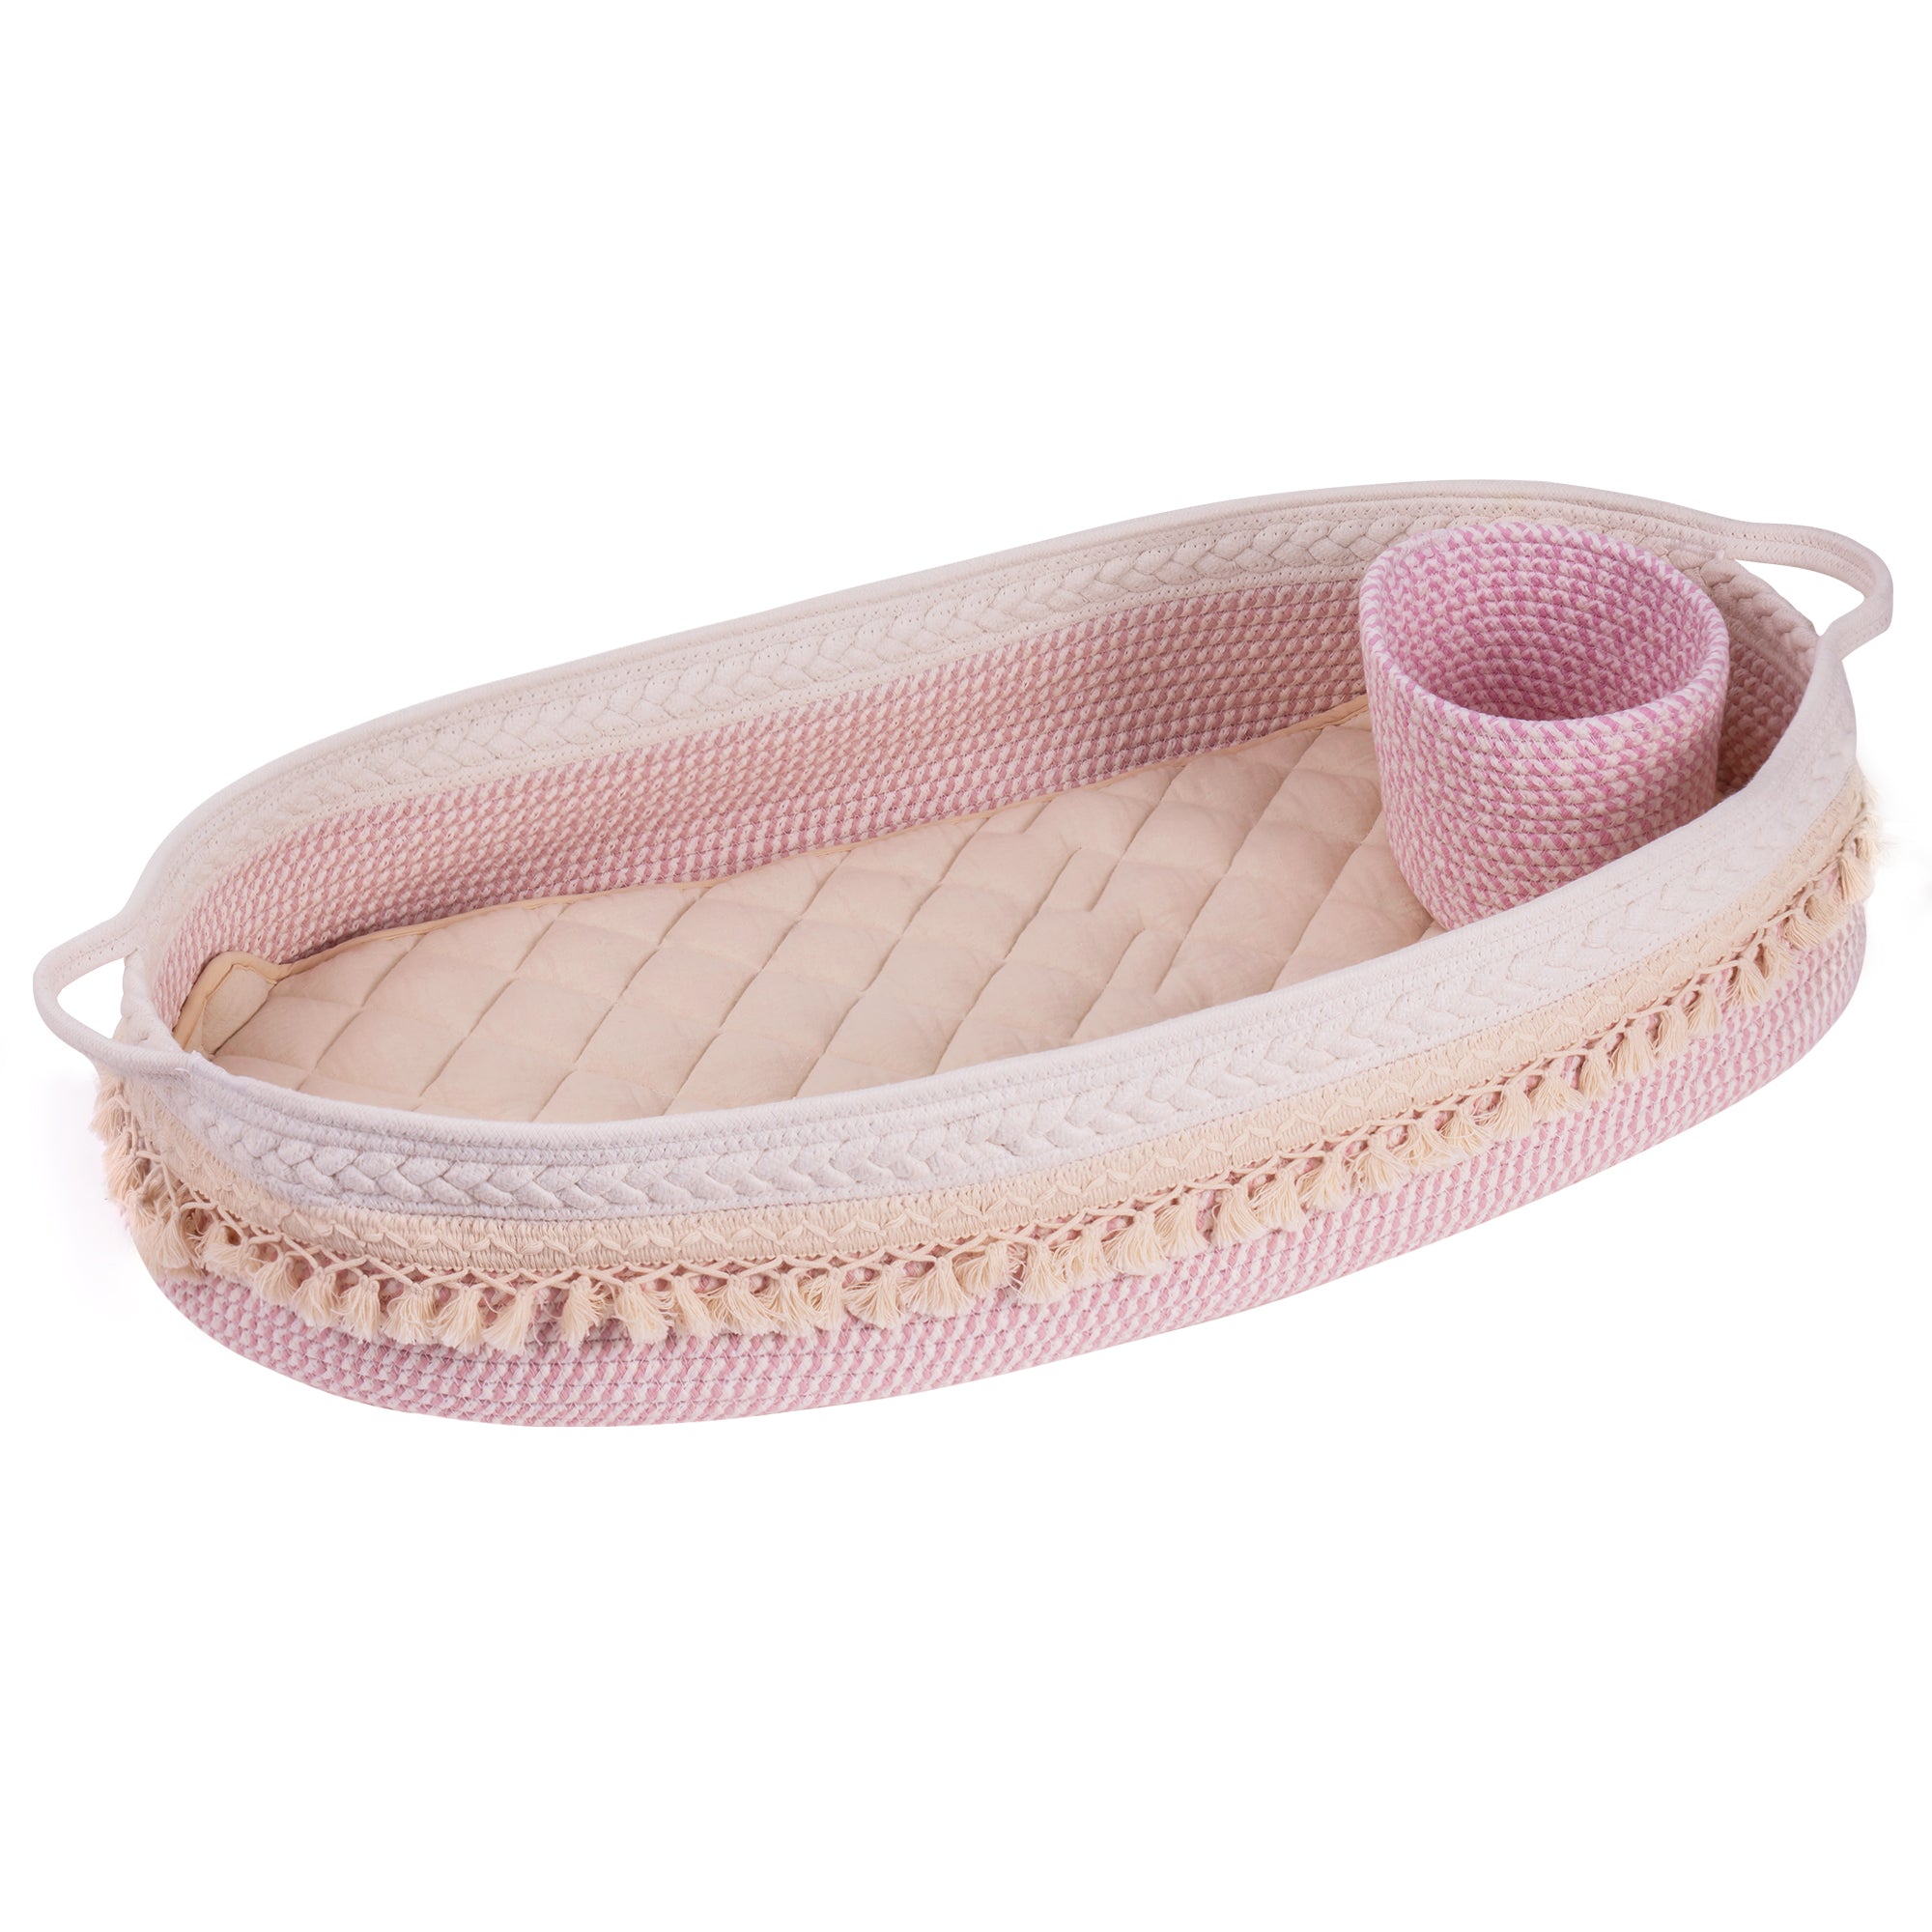 Baby Changing Basket, Handmade Woven Cotton Rope Moses pink-cotton